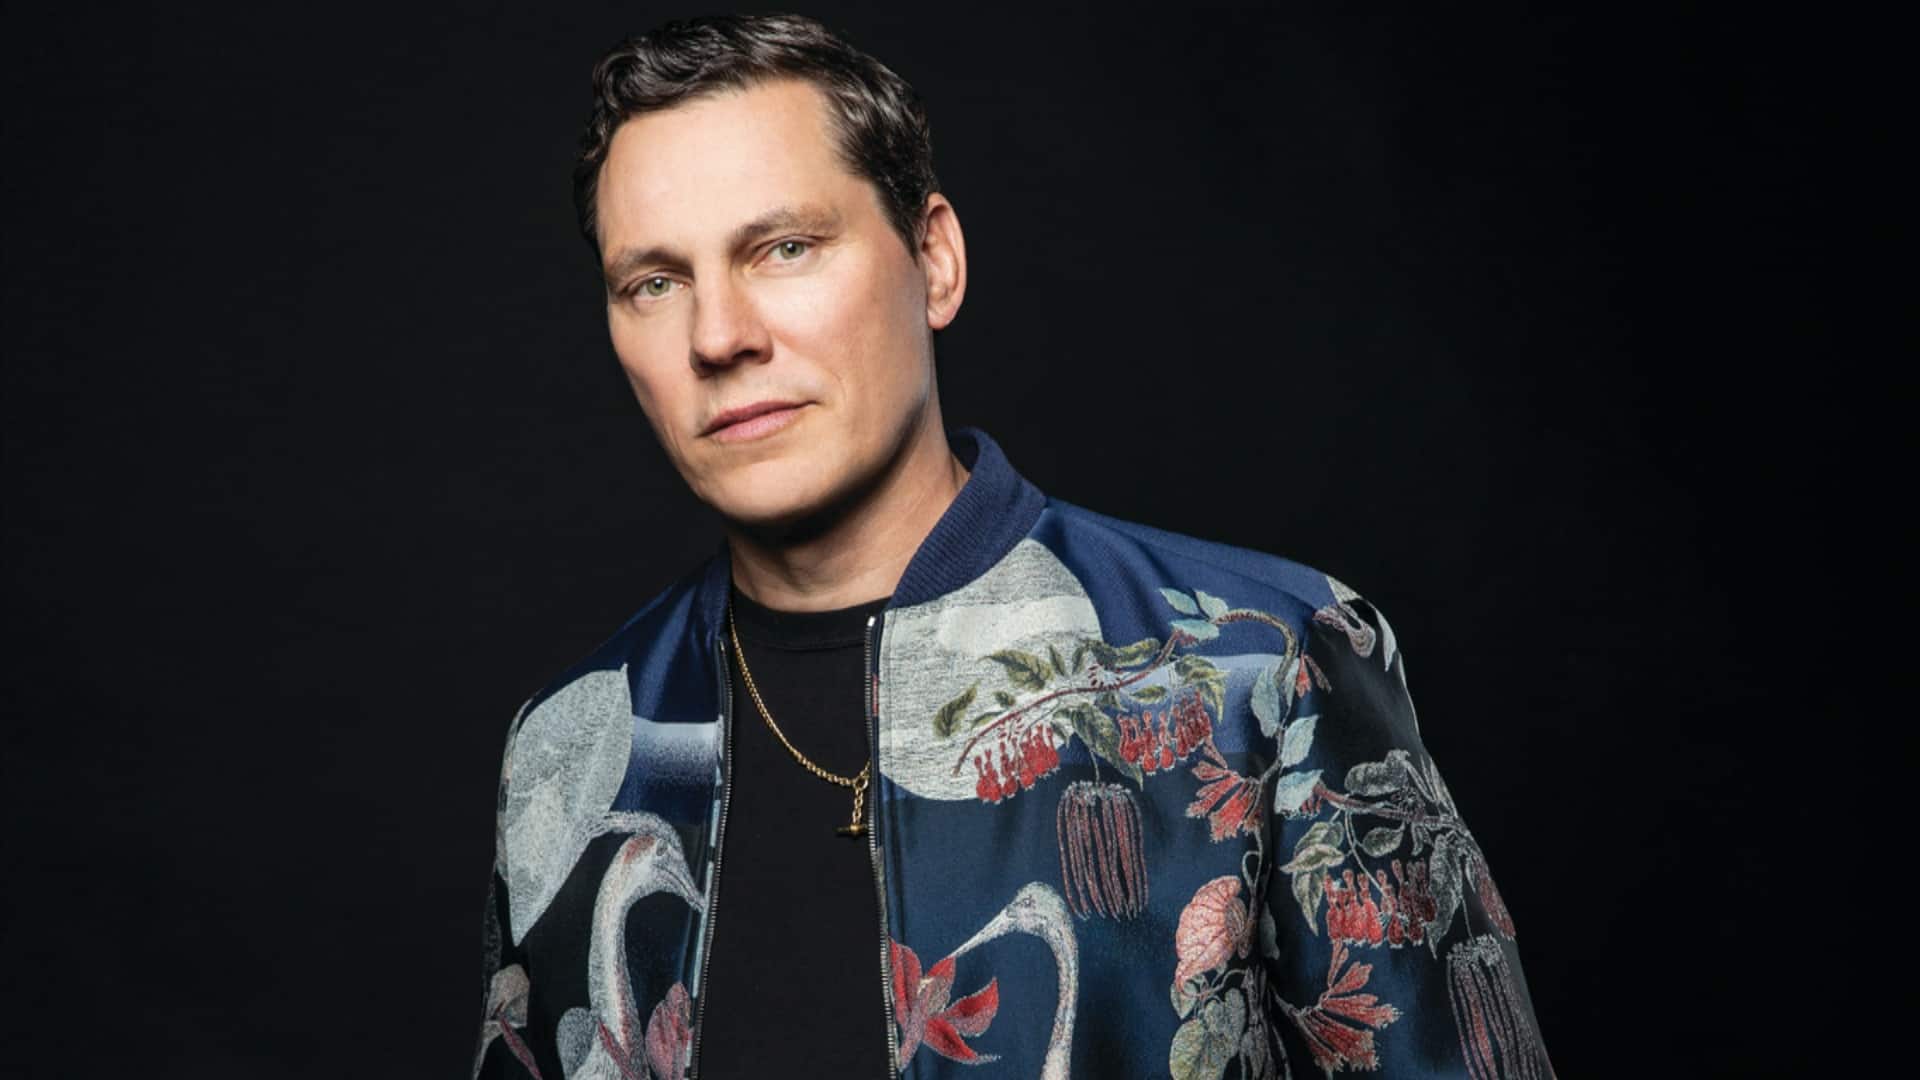 Tiësto & Tate McRae's ‘10:35’ gets catchy tech house remix from Joel Corry: Listen